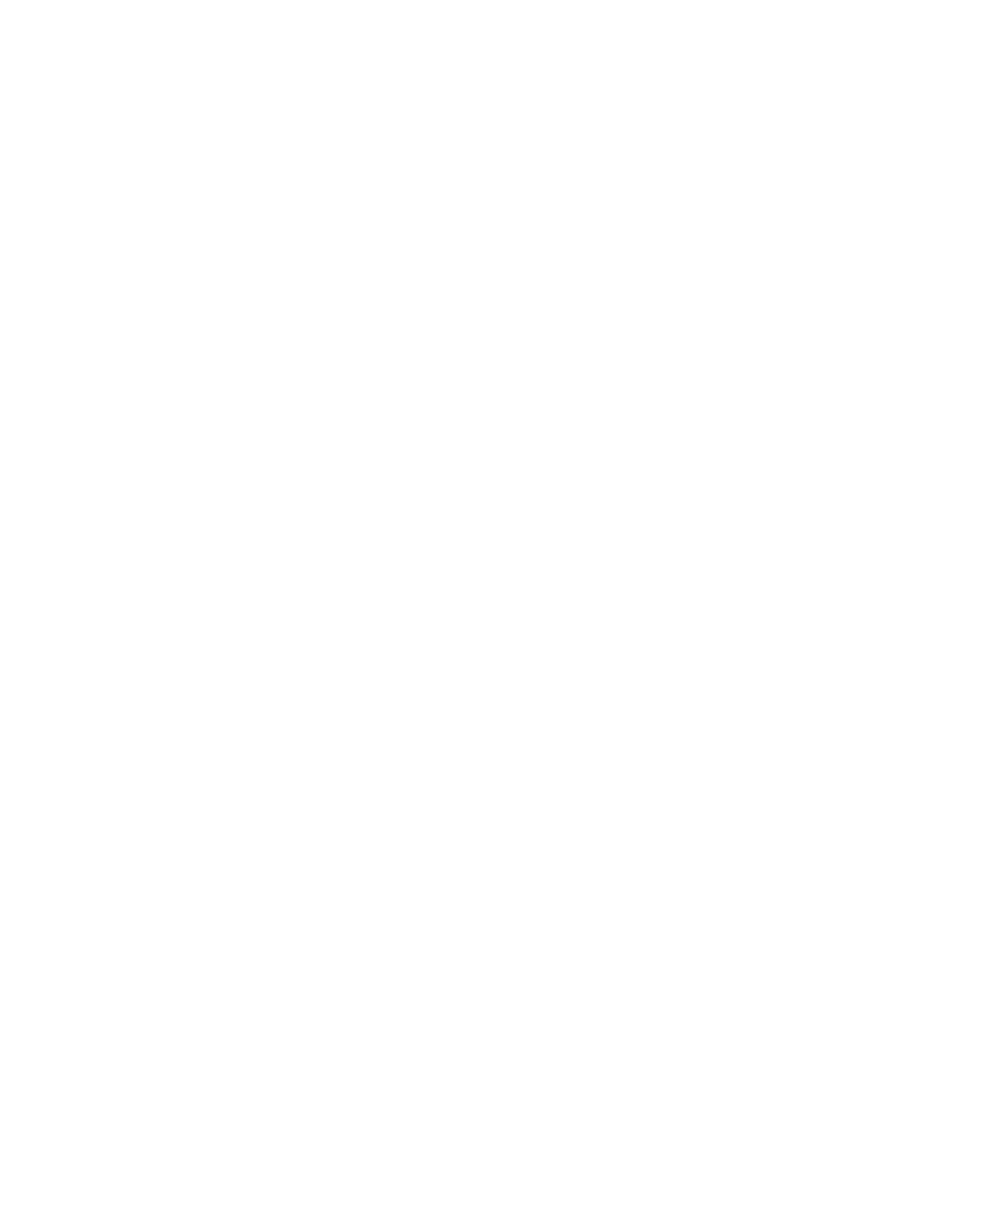 DANGERGRIZZLY